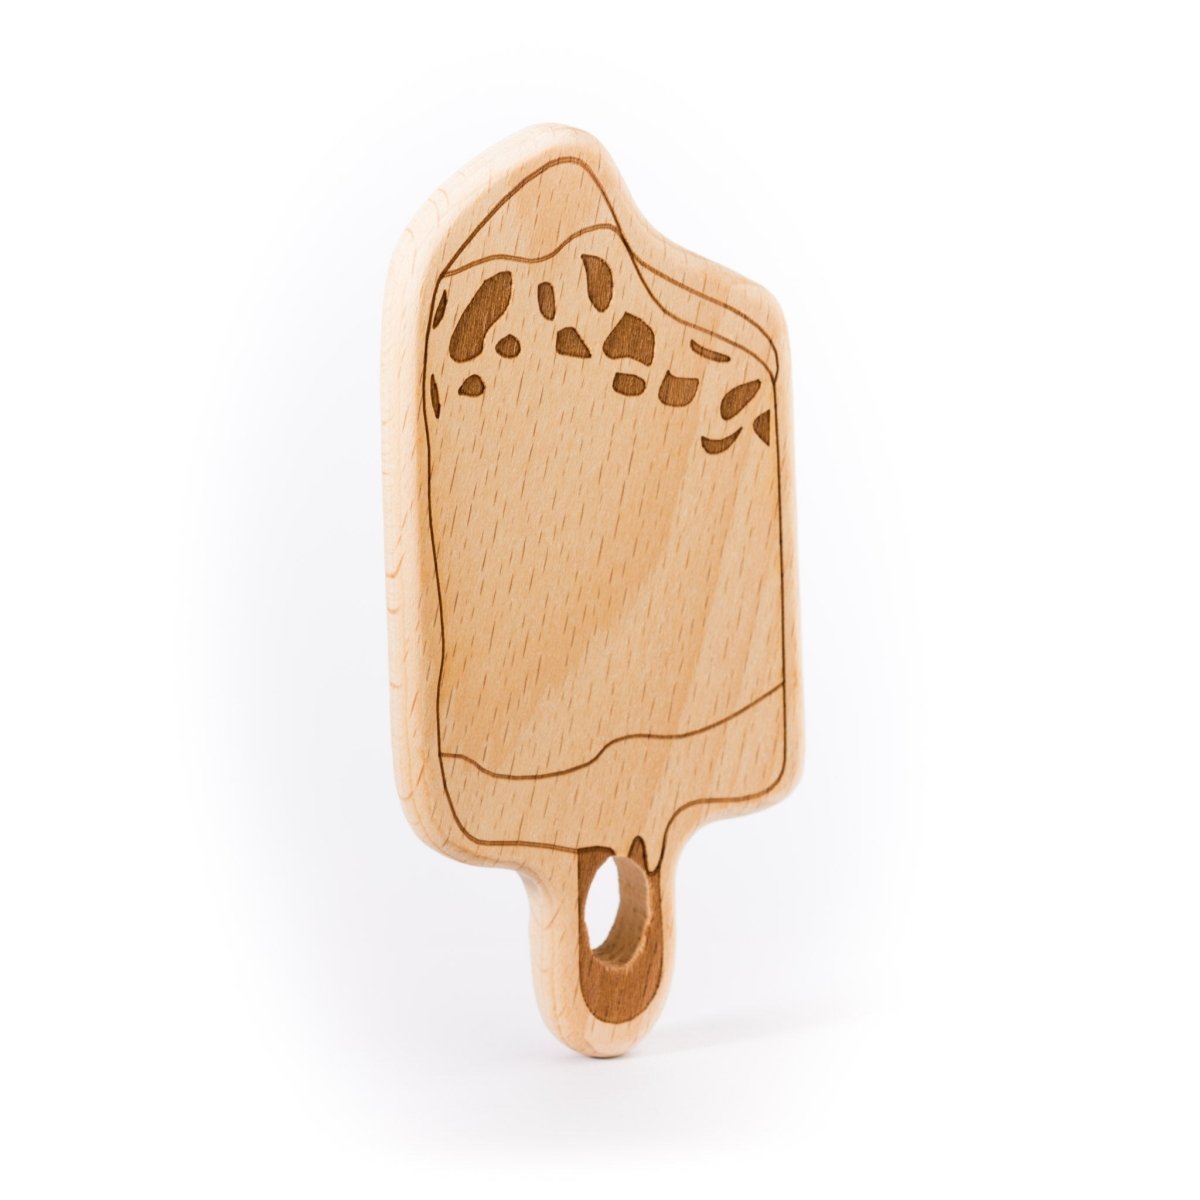 Wood Rings & Pendants Large - Beech Wood Ice-Cream Bar from Cara & Co Craft Supply